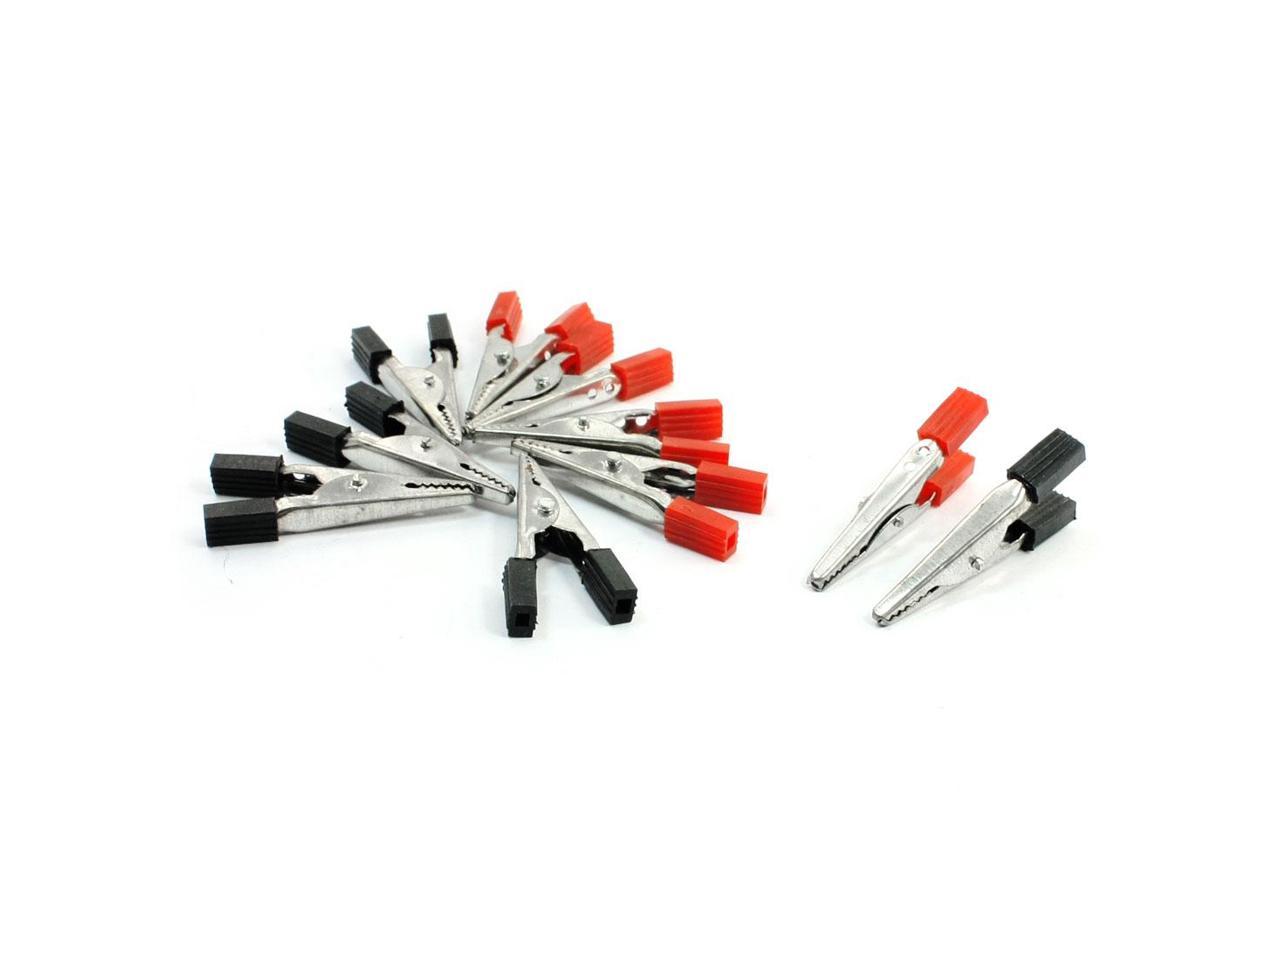 22 Pcs Insulated Cover Test Probe Alligator Clamps Crocodile Clips Red Black 